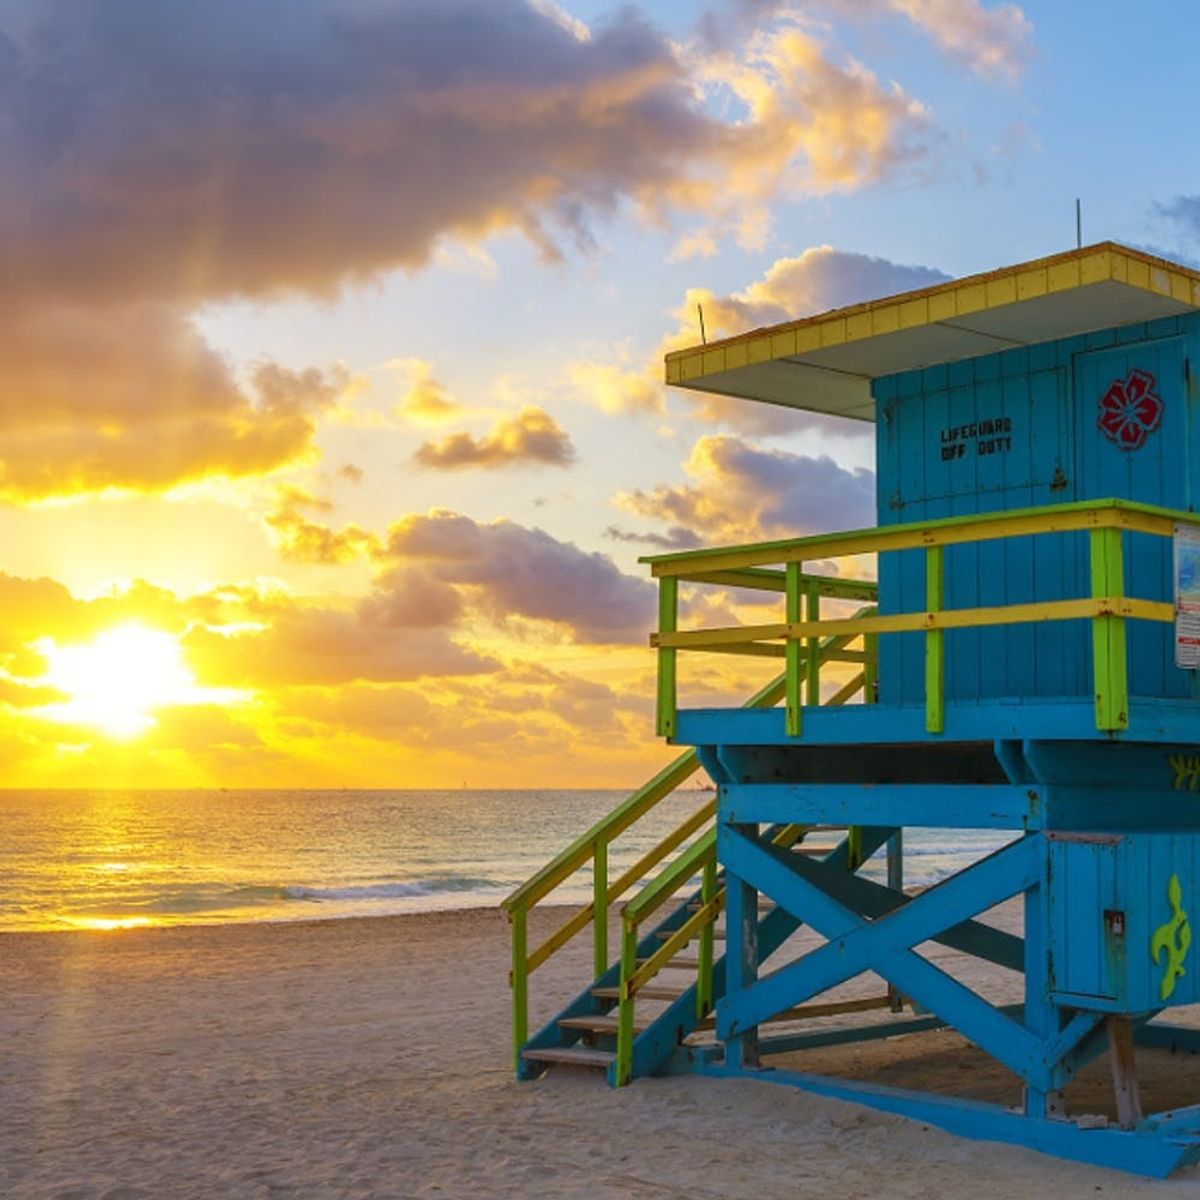 10 Pics That Prove Miami Is the Colorful City of Your Dreams